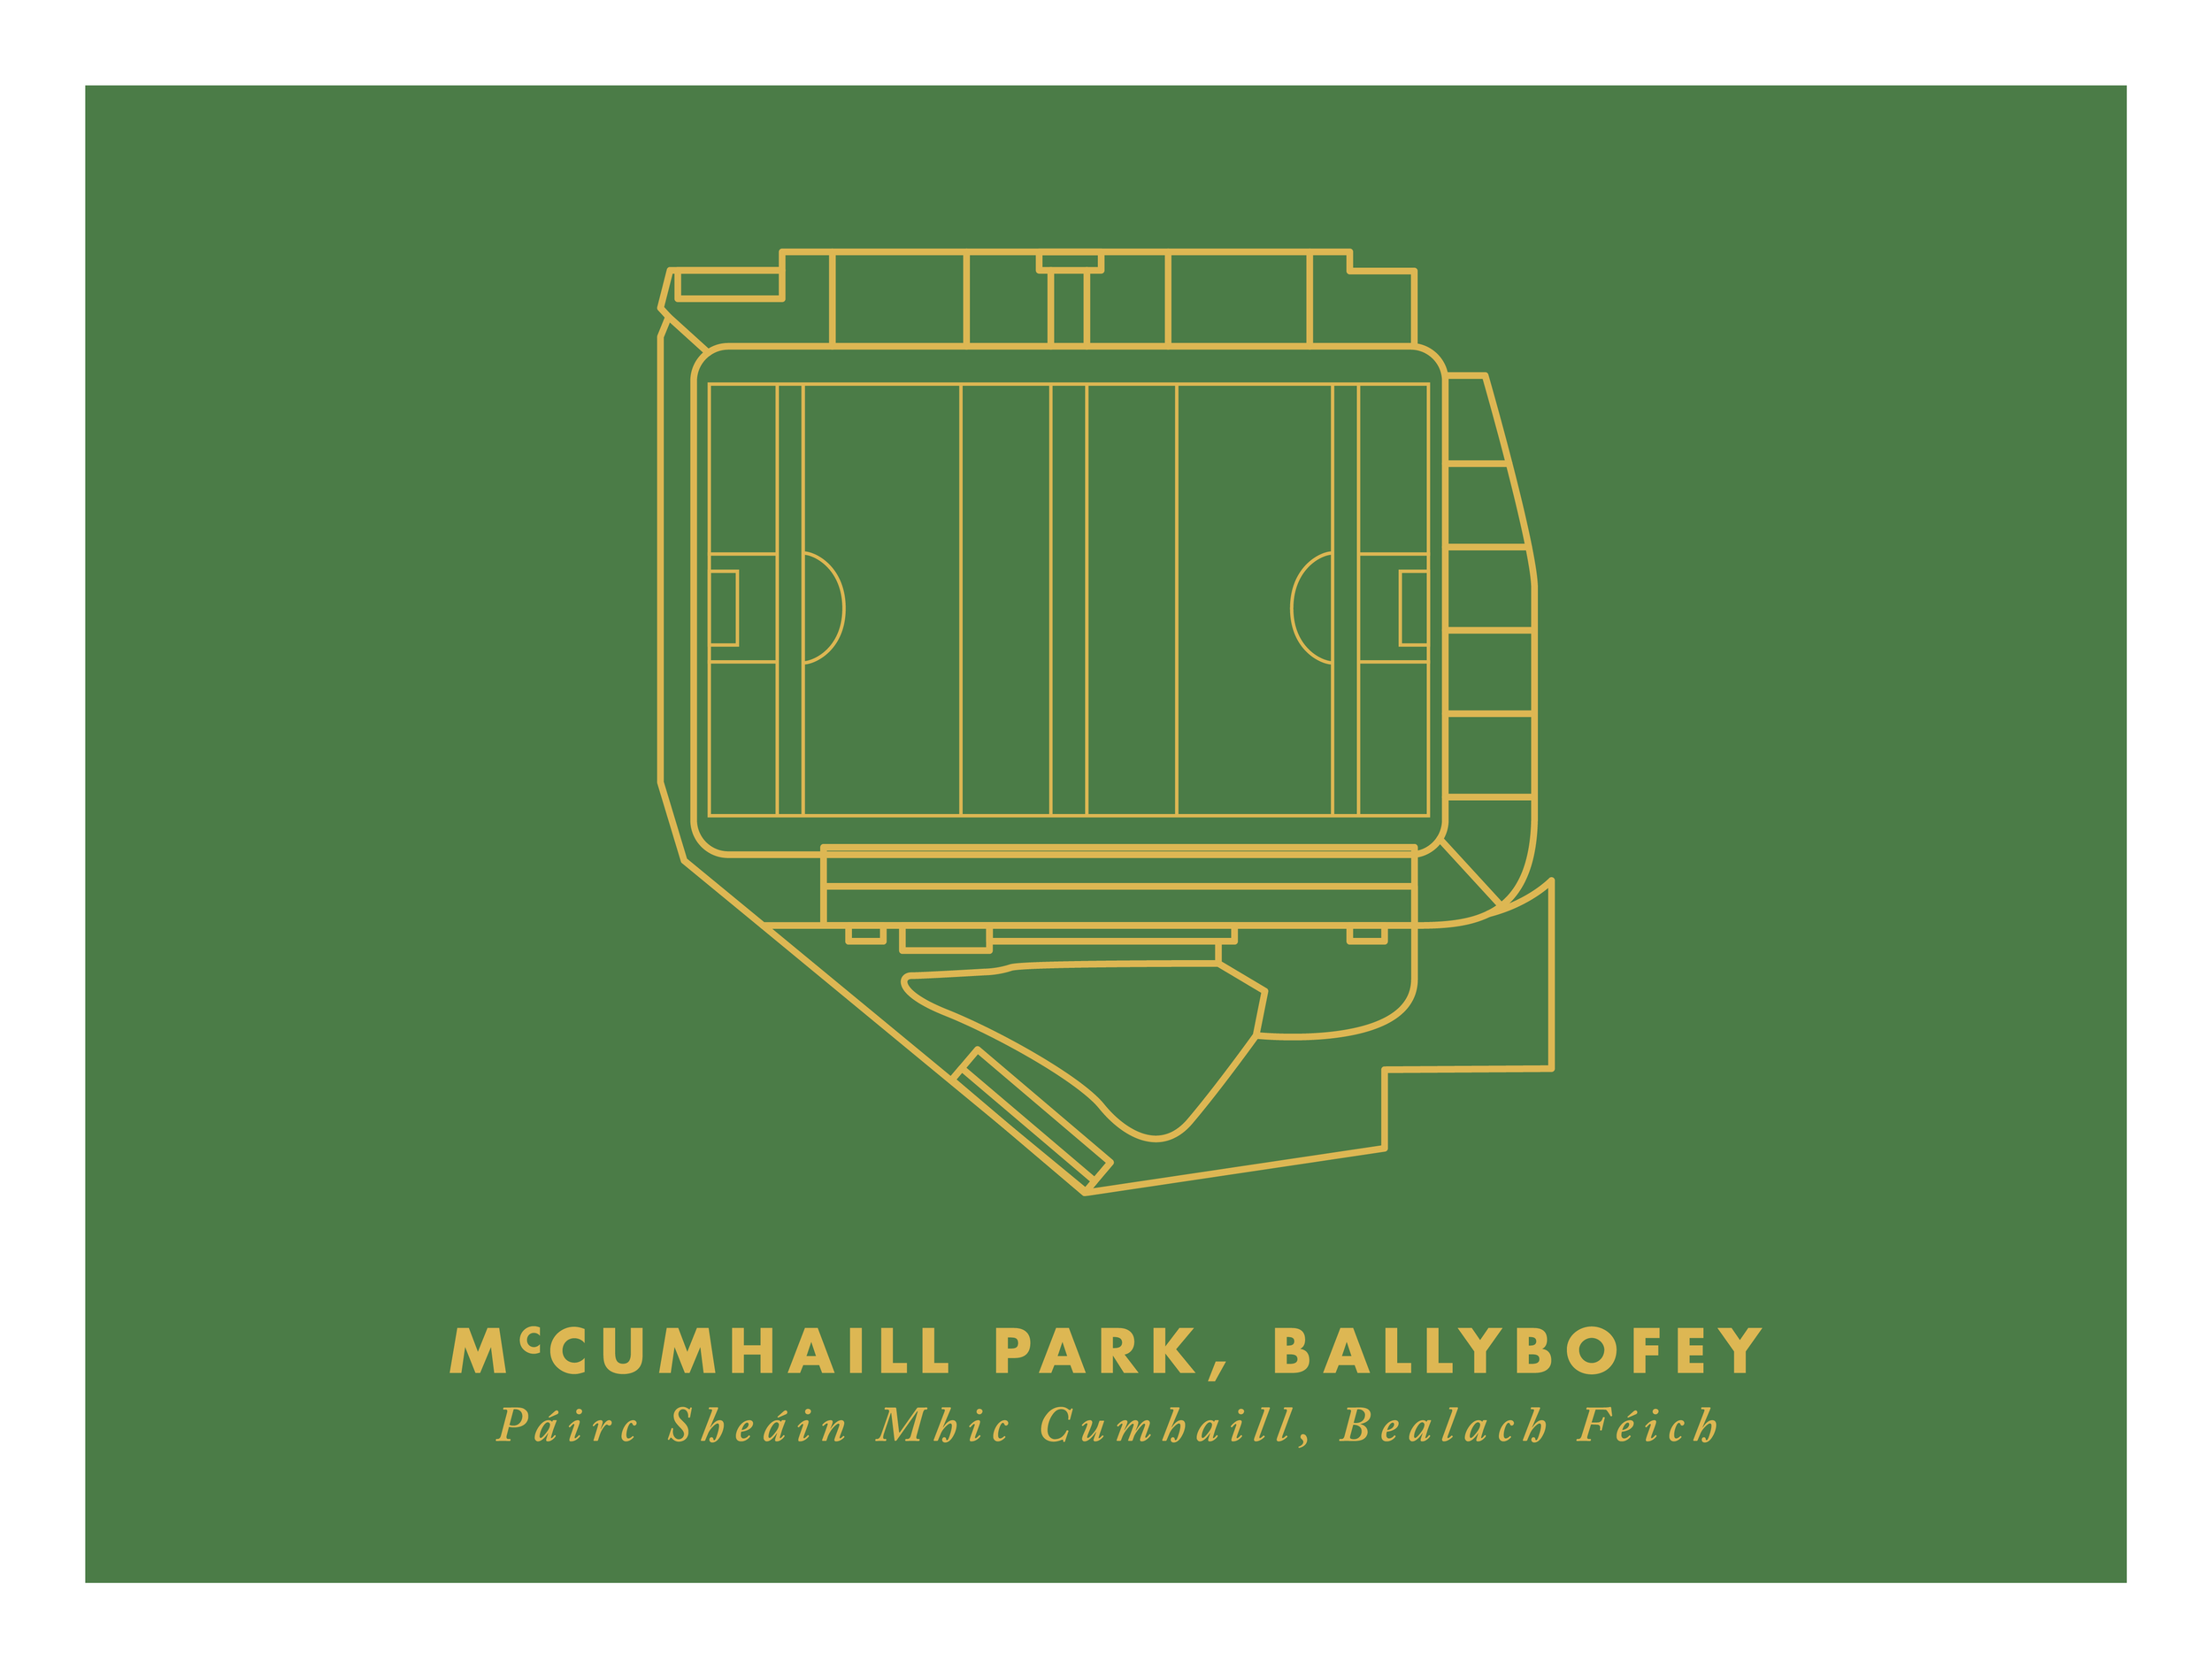 GAA Stadiums of Ireland Individual Colours 16x12 v01-25.png